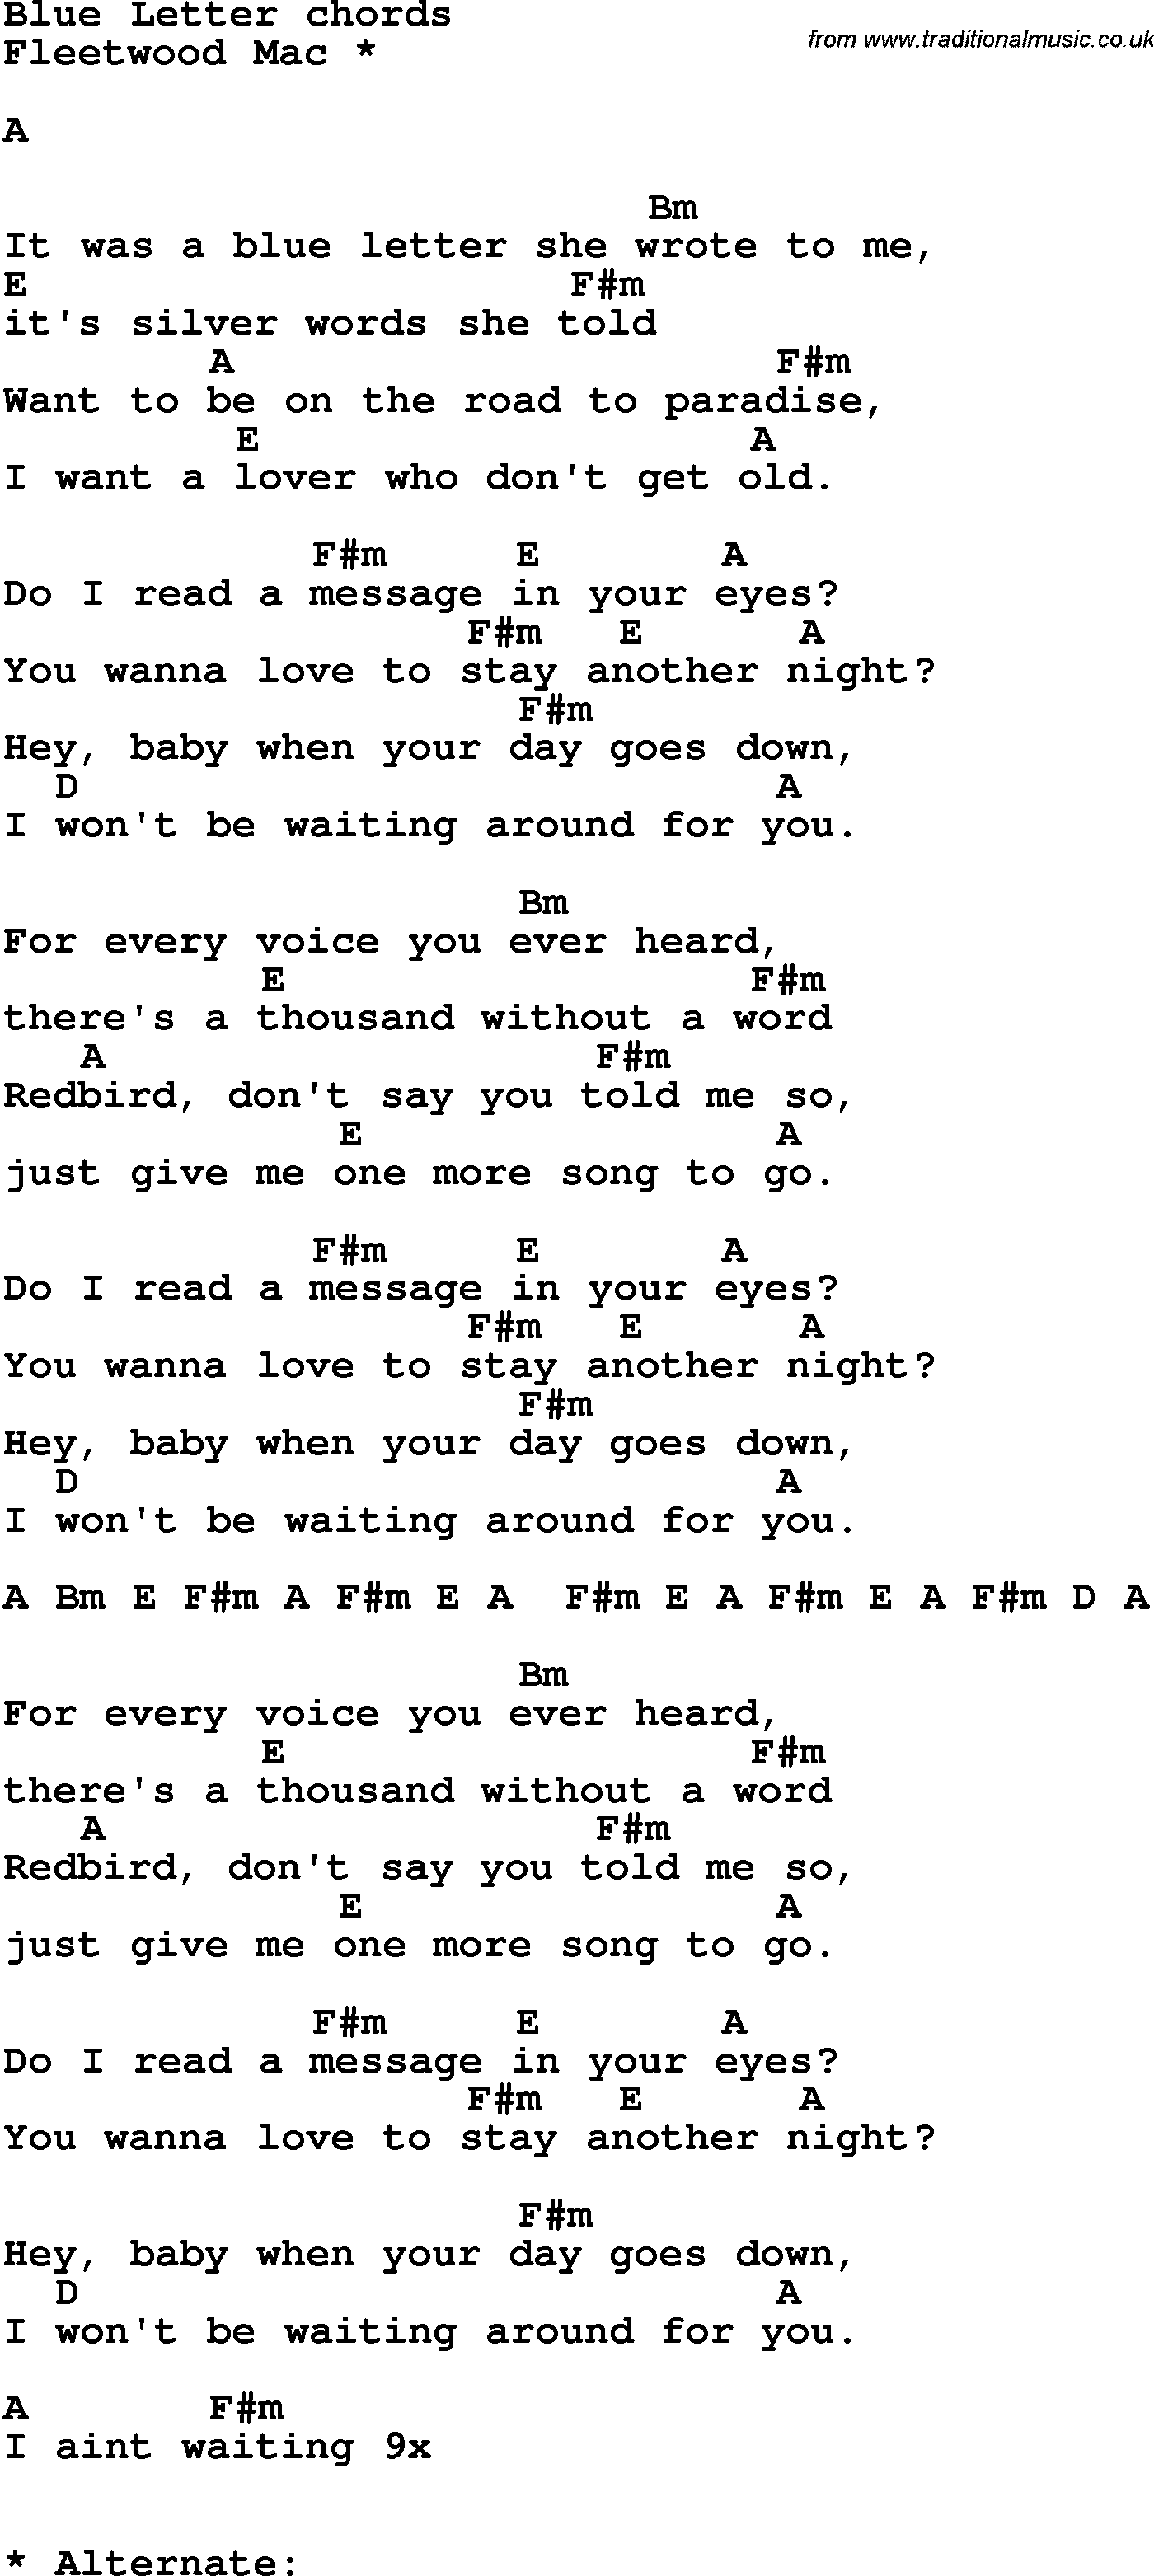 Song Lyrics with guitar chords for Blue Letter